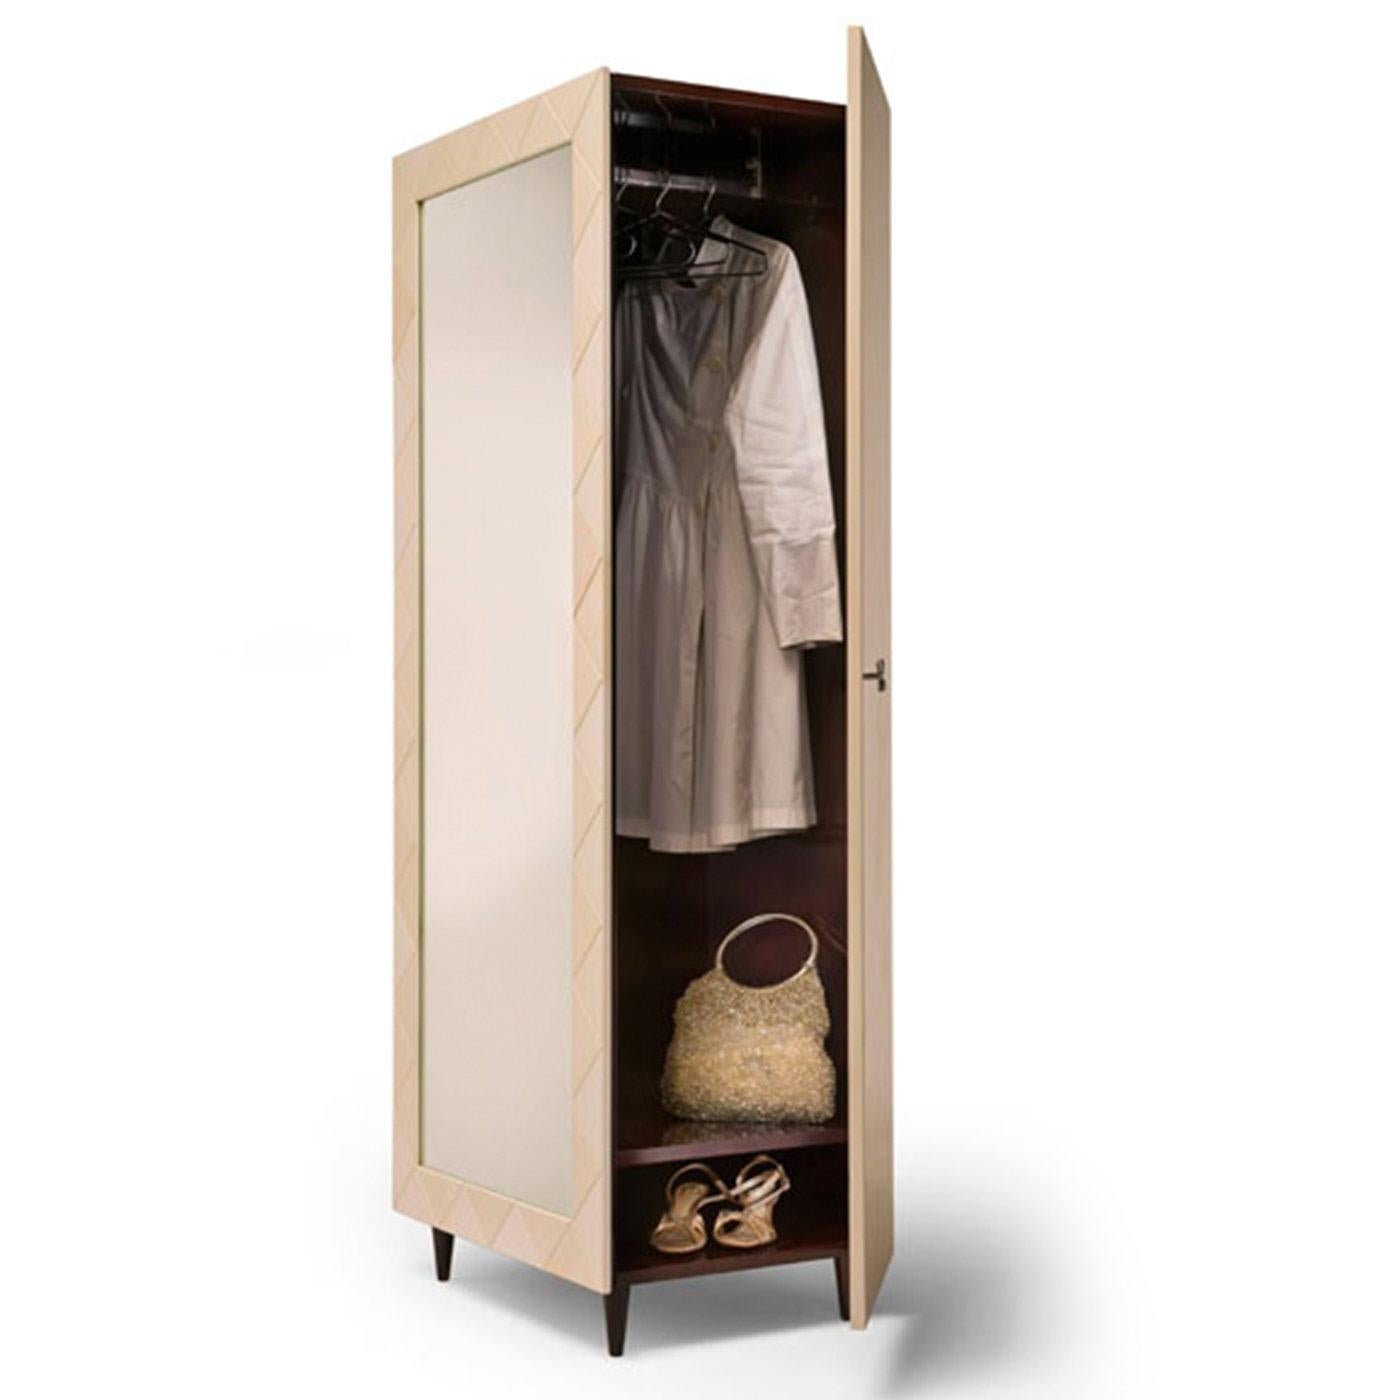 The essential lines of this small wardrobe from the Momiji Collection offer a stylish storage solution for a modern entryway or guest bedroom. The rectangular structure is wrapped in matte natural parchment with a front large mirror. The right side